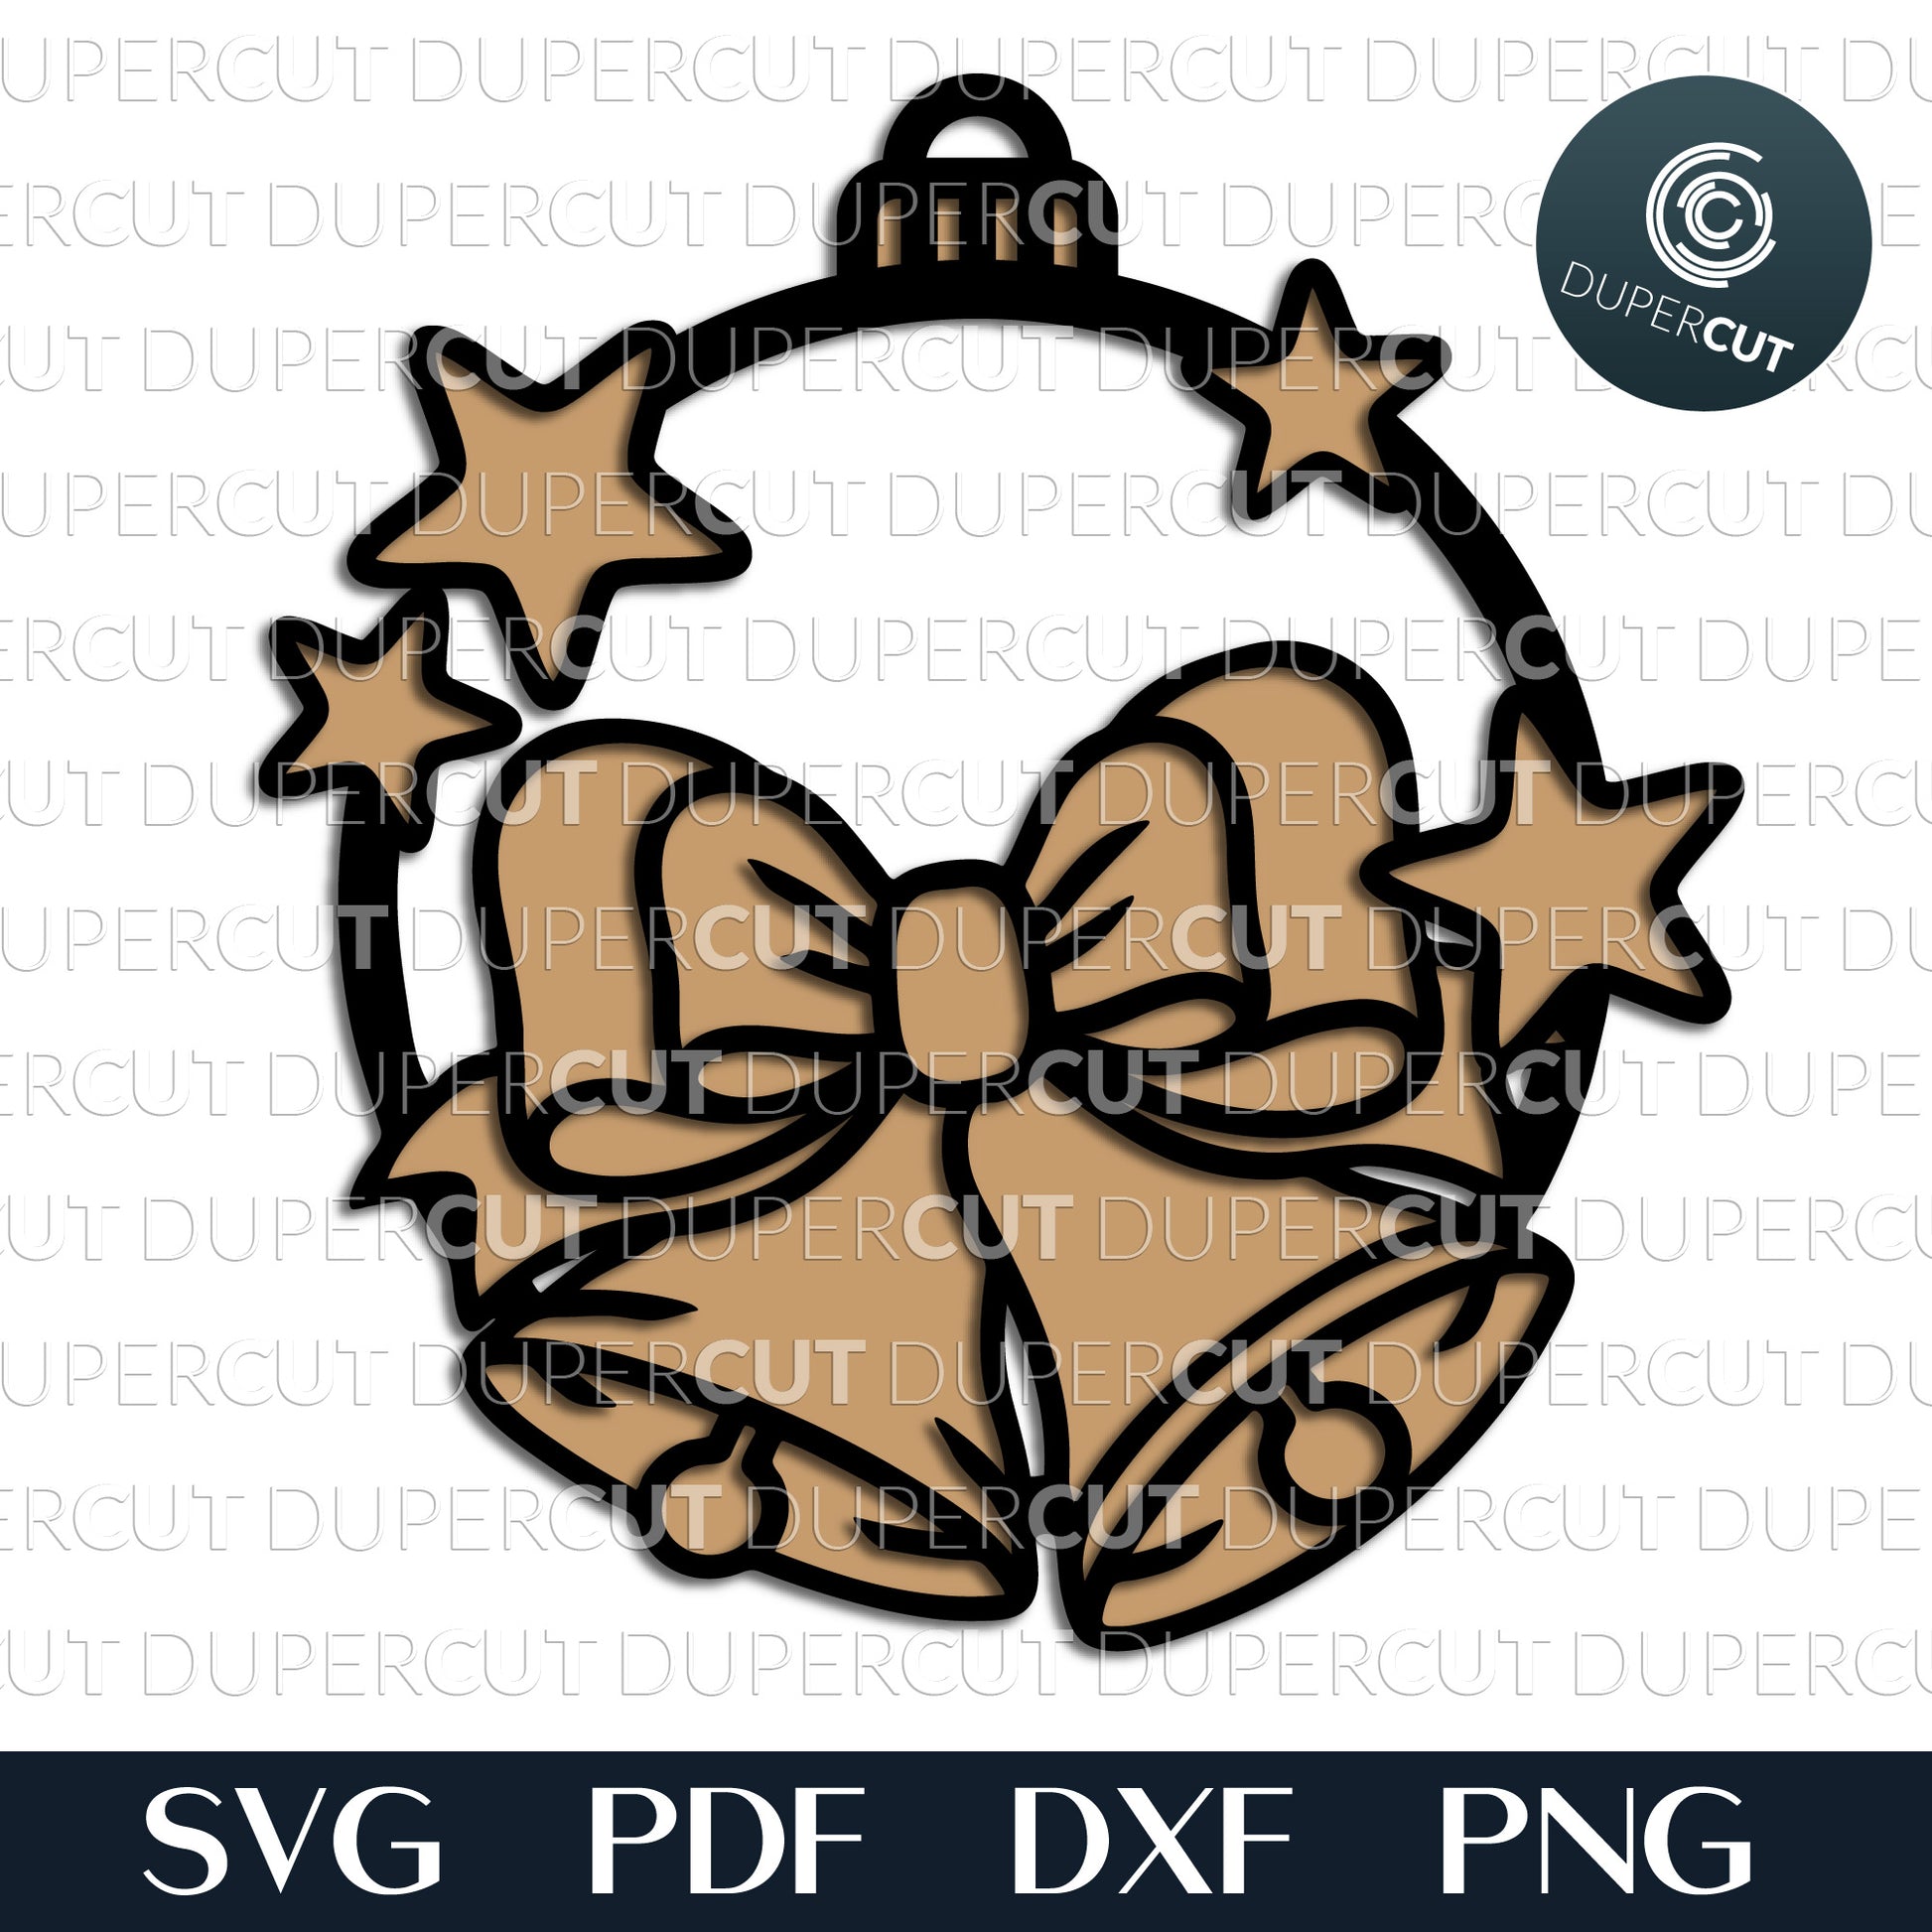 Christmas Bells ornament - layered cutting template - SVG DXF PDF vector files for laser engraving and cutting, Glowforge, Cricut, Silhouette Cameo